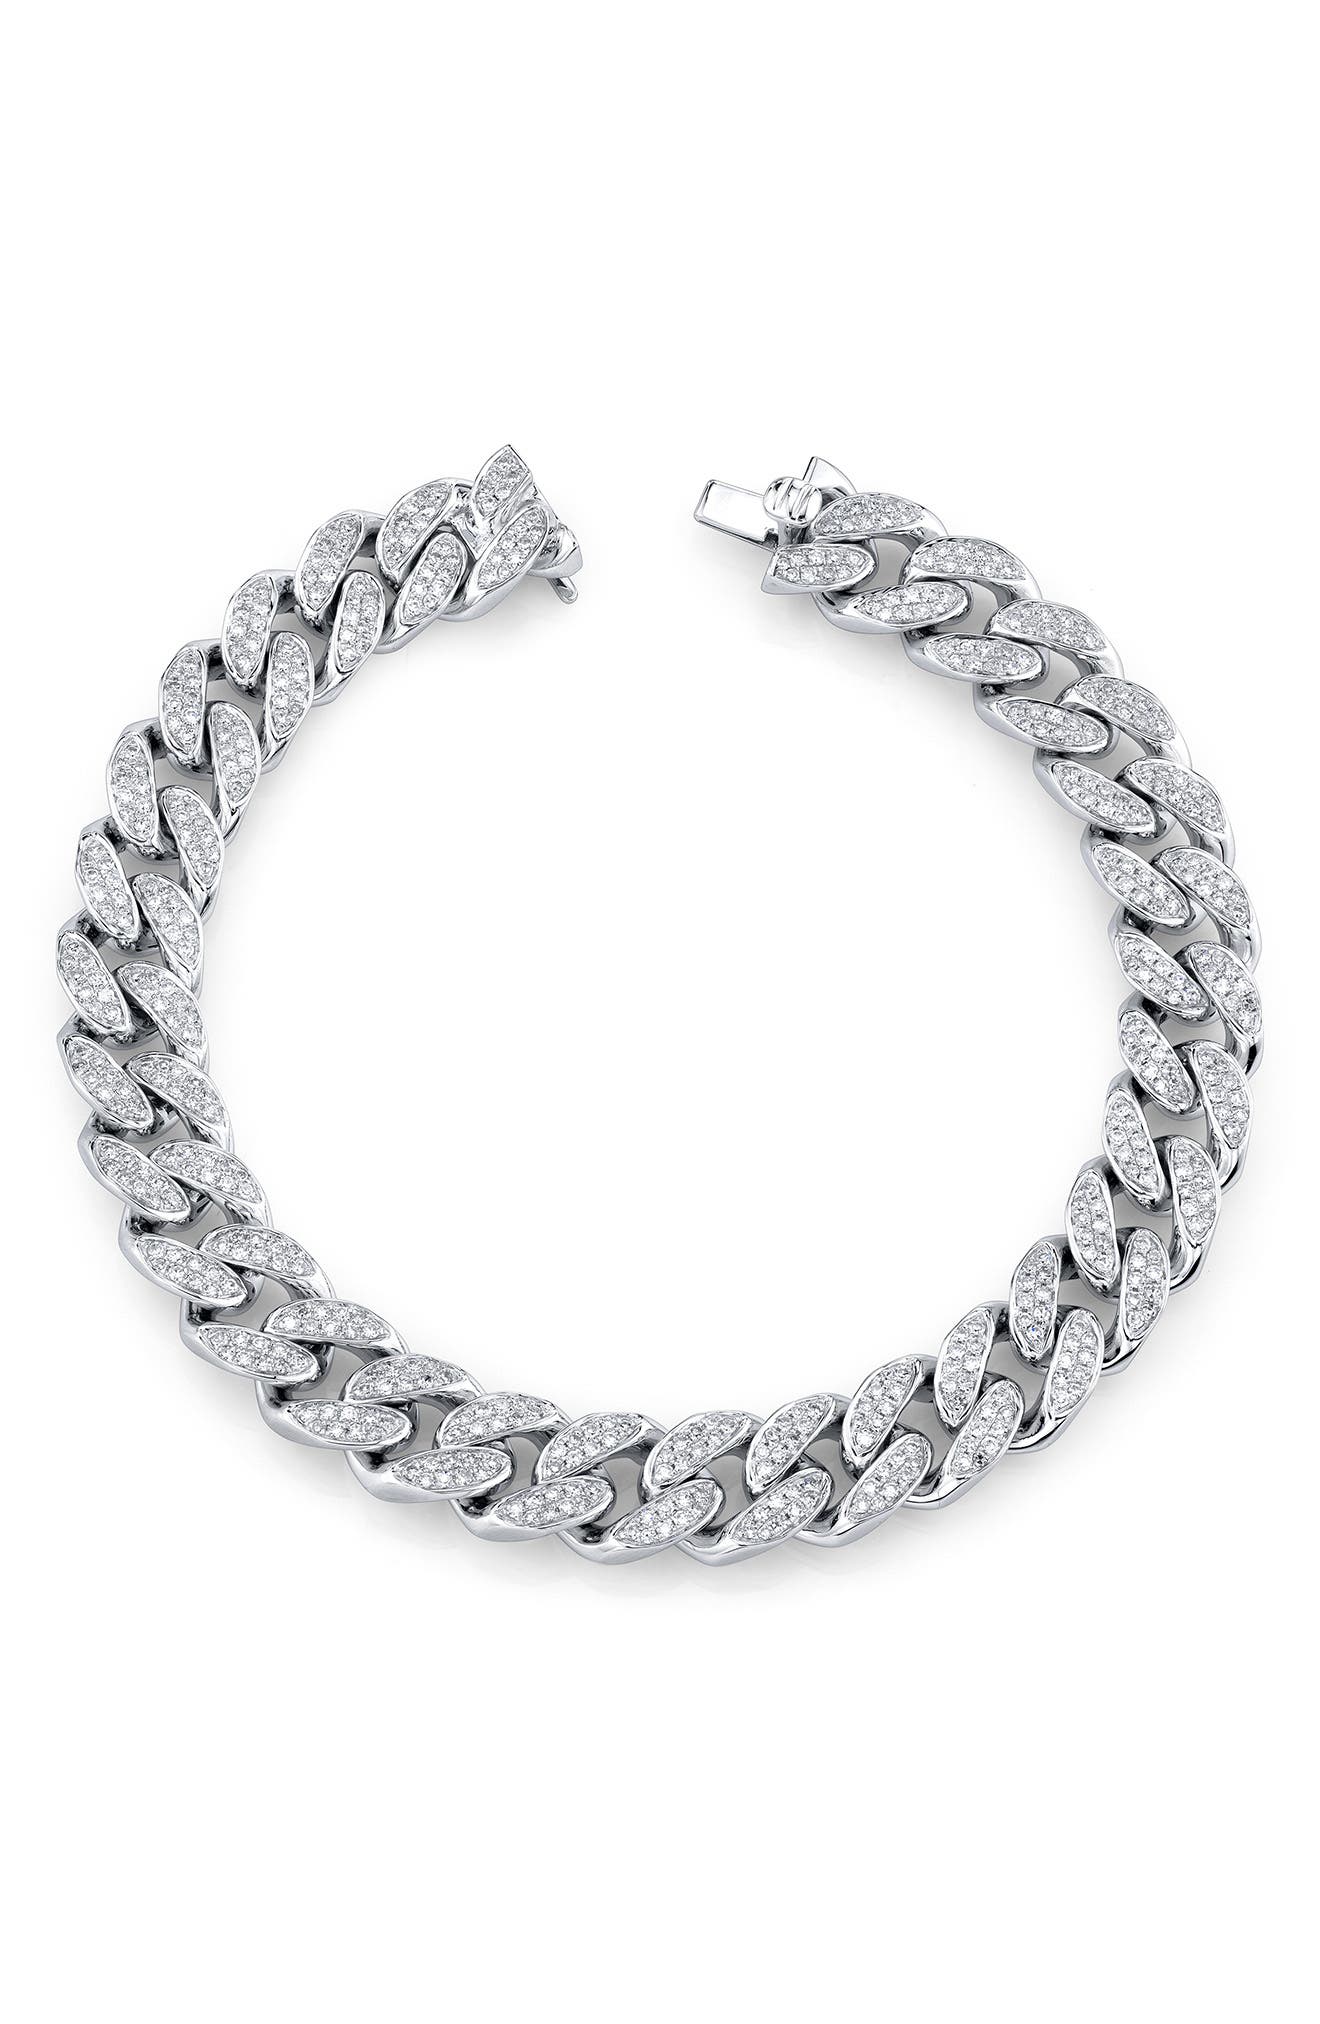 SHAY Pave Diamond Link Bracelet in White Gold at Nordstrom, Size 7.75 Us